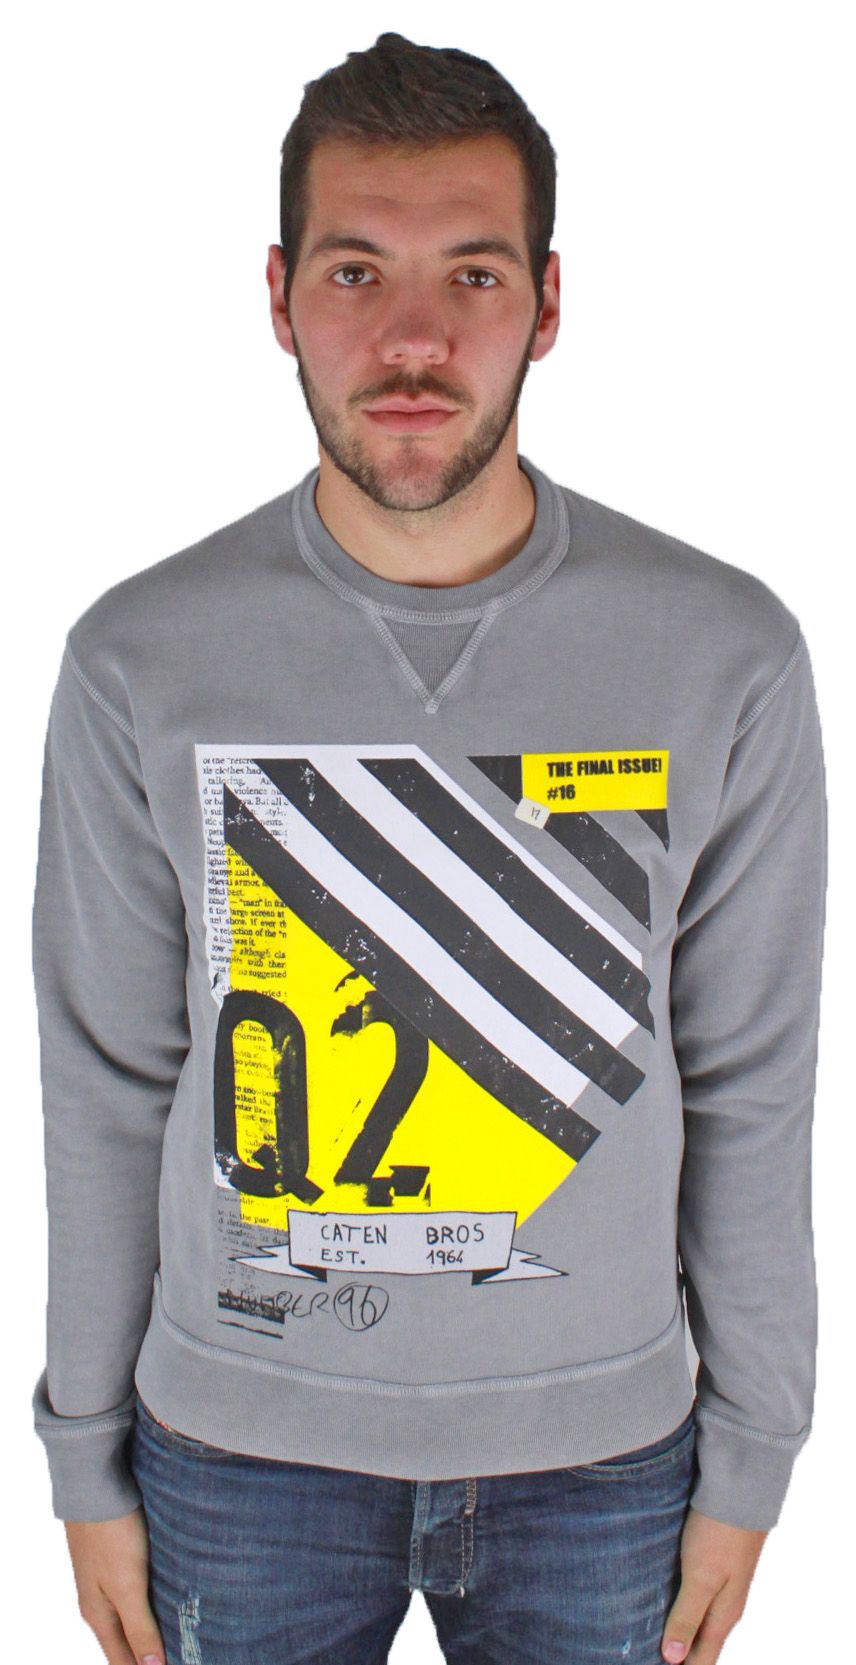 DSquared2 S74GU0137 858 Jumper. Grey Sweater. Large Graphic Motif On Front. 